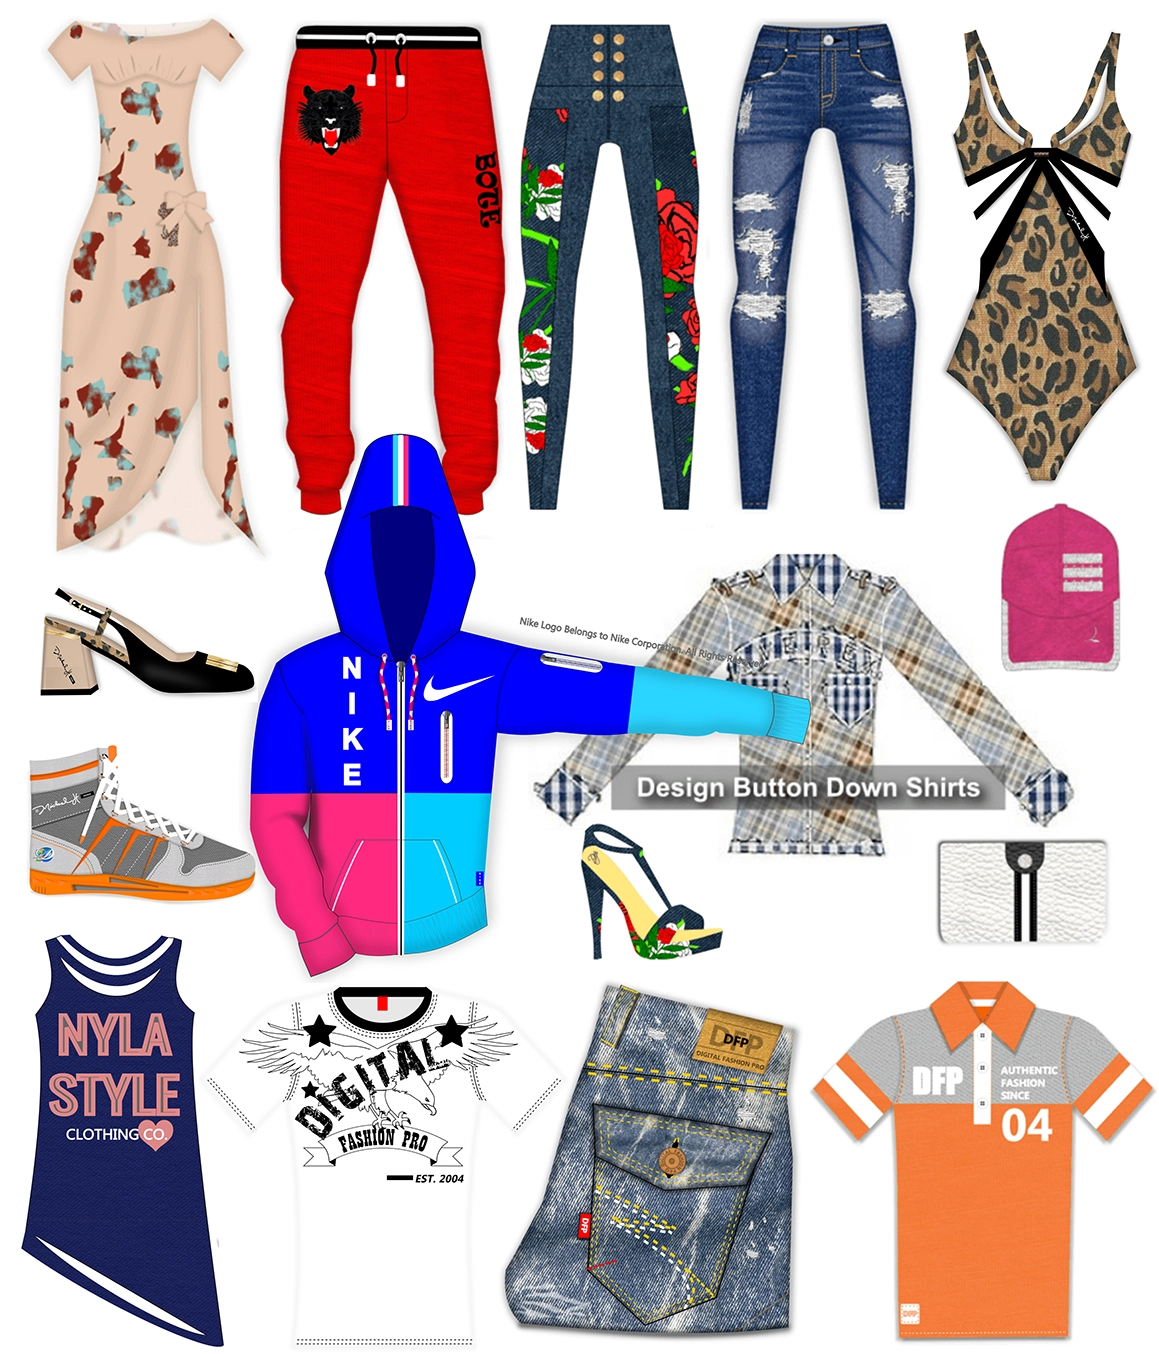 Clothing design software - Digital Fashion Pro - how to design clothing - collage